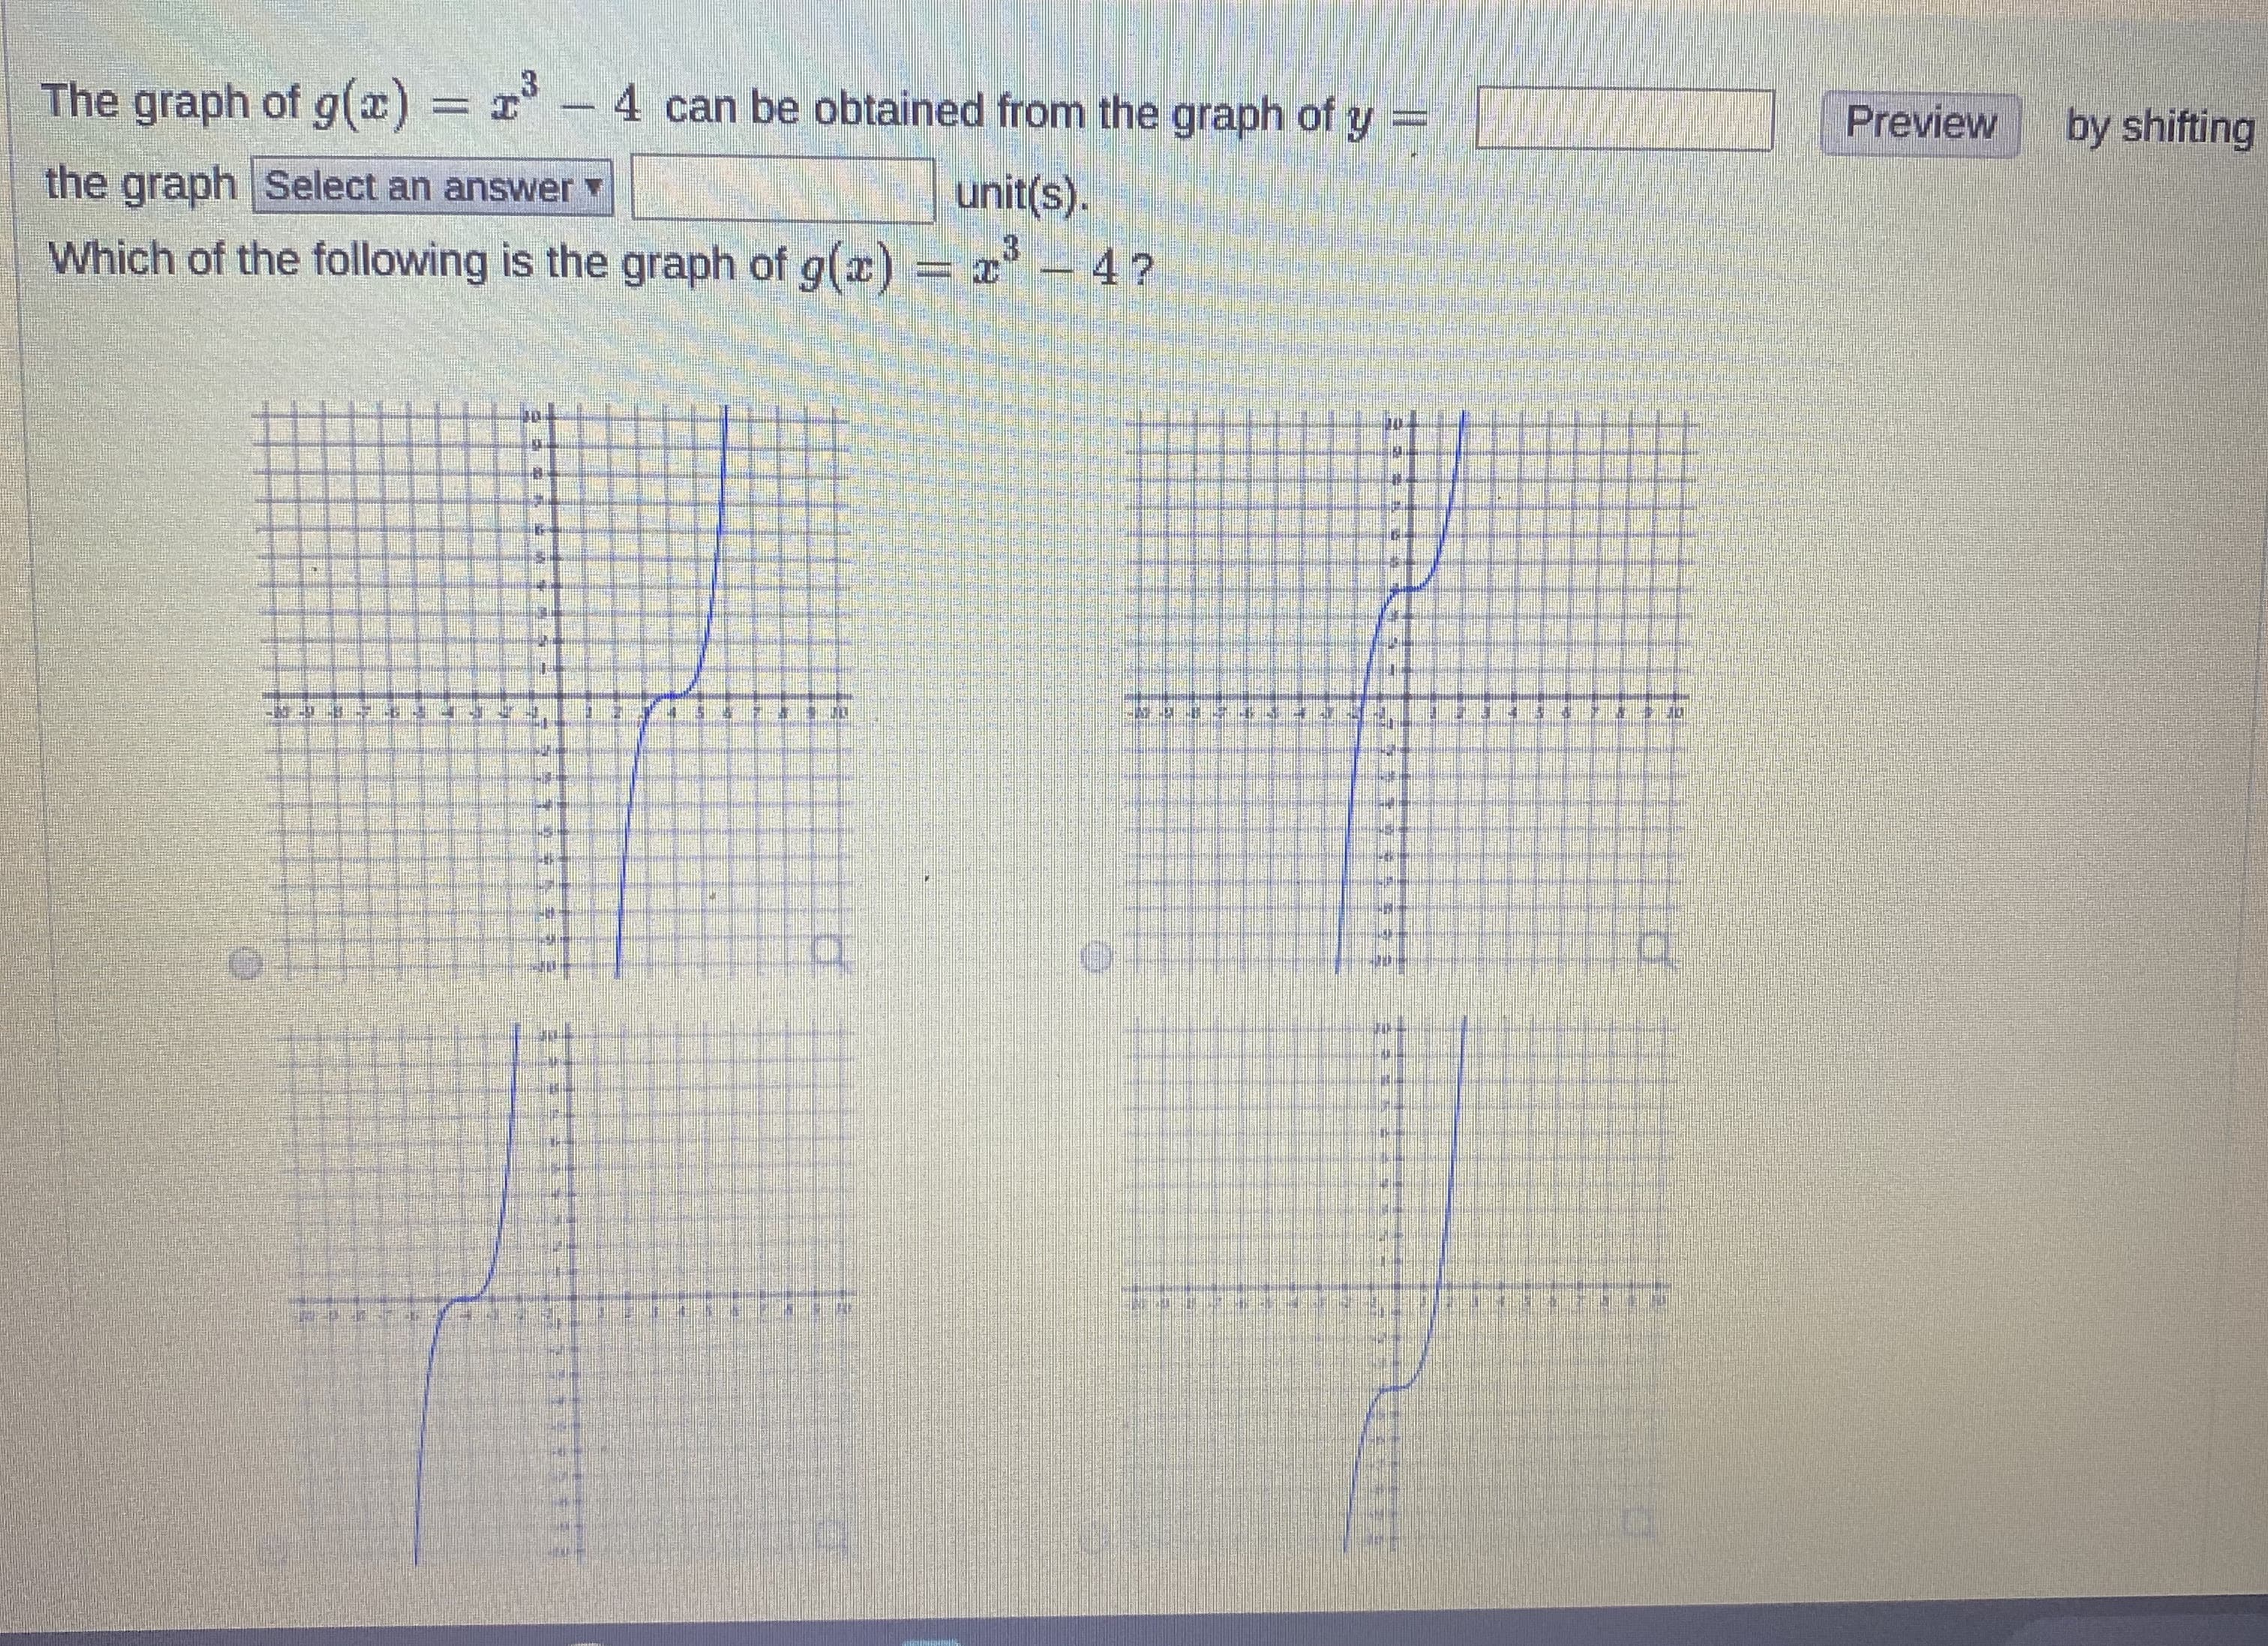 The graph of g(x) = x- 4 can be obtained from the graph of y =
Preview
by shifting
the graph Select an answer
unit(s).
Which of the following is the graph of g(x) = x 4?
